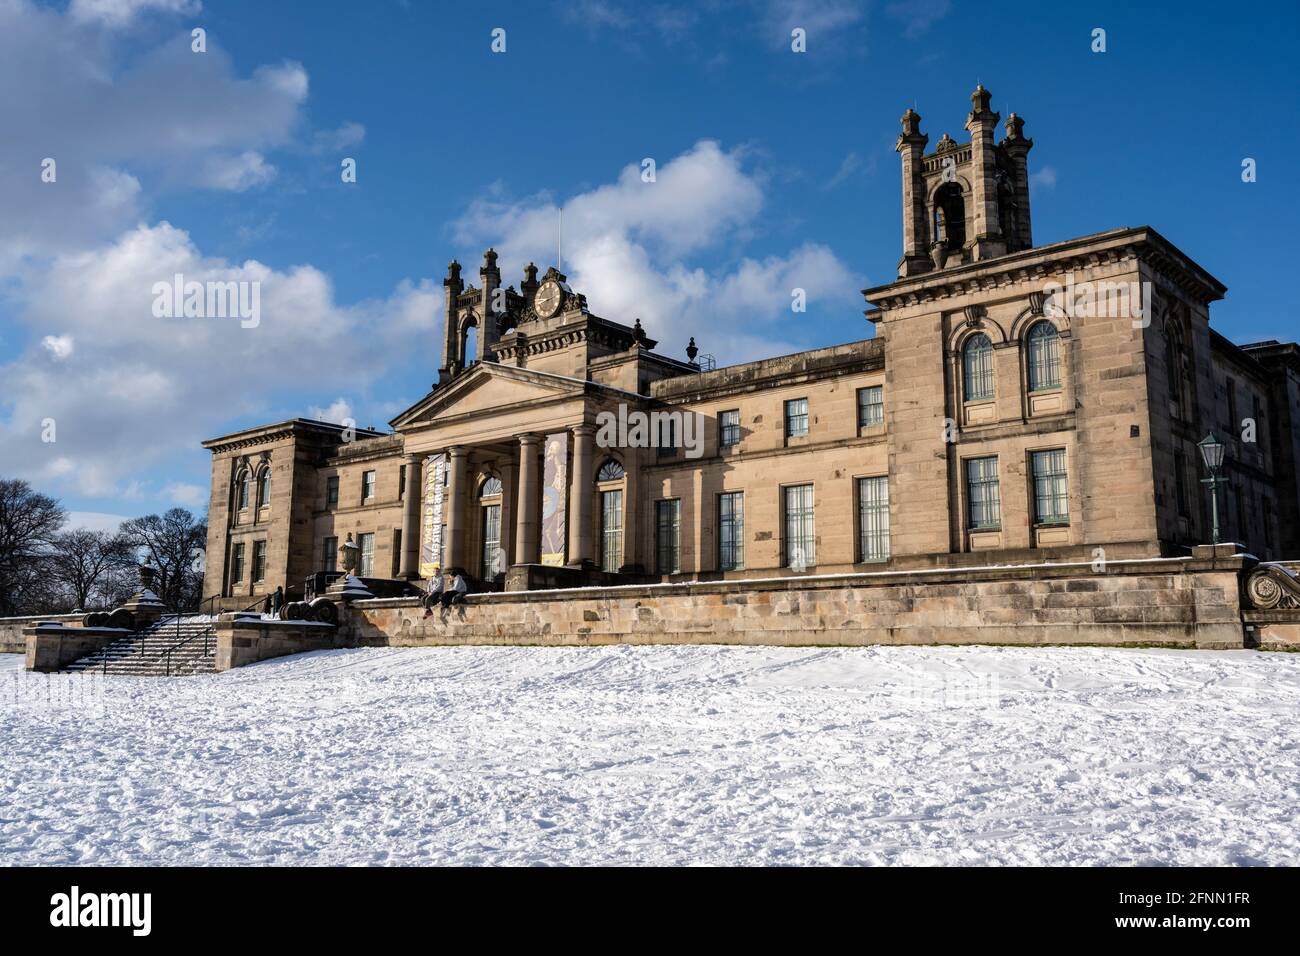 Scottish National Gallery of Modern Art Two (formerly the Dean Gallery) in snow, Edinburgh, Scotland, UK Stock Photo